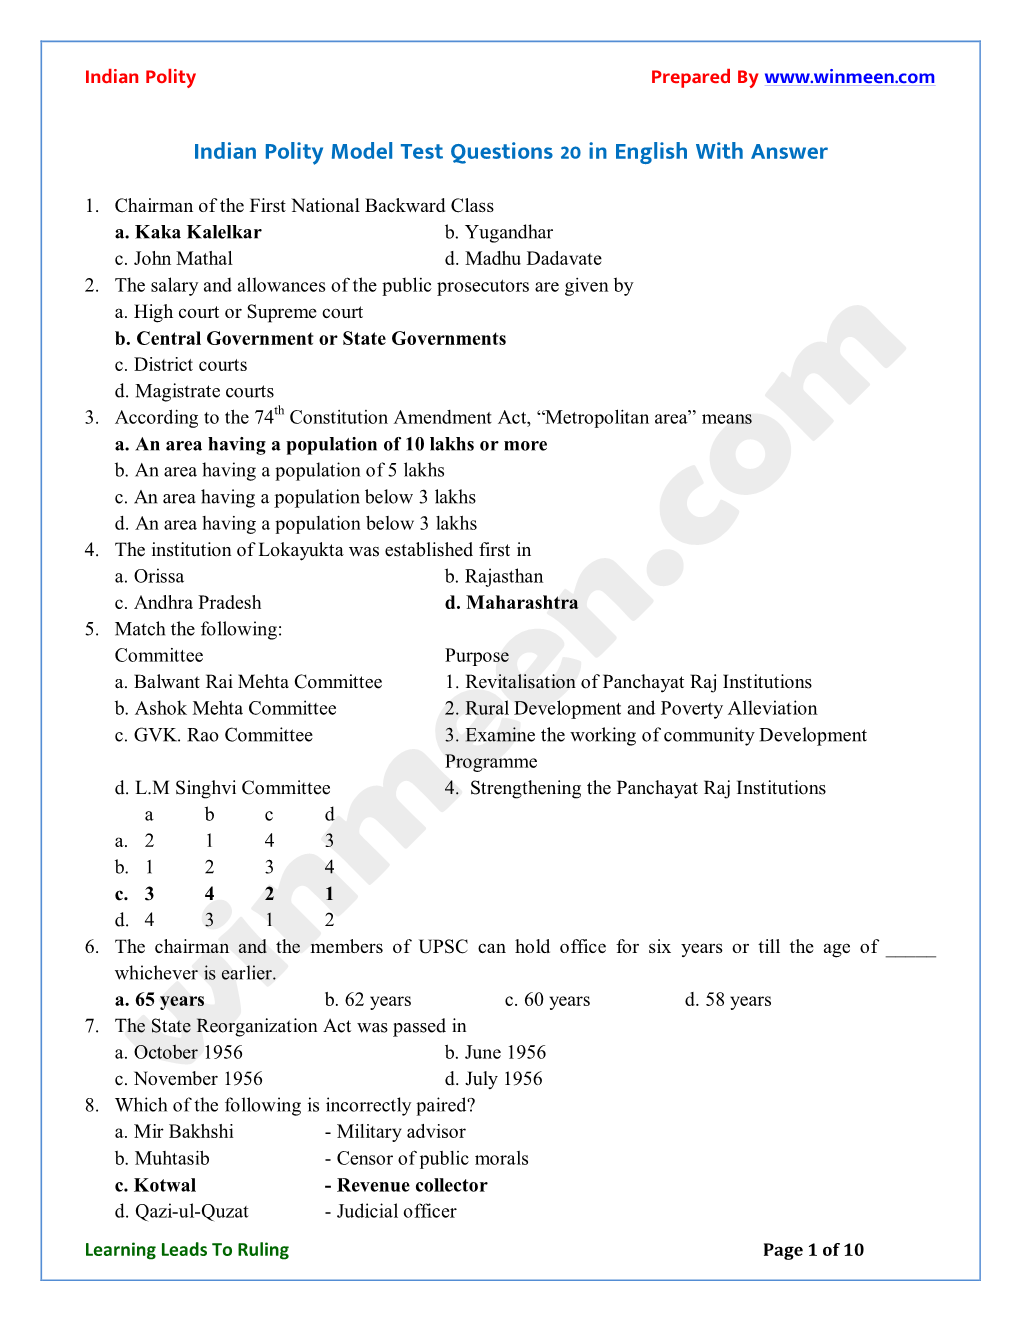 Indian Polity Model Test Questions 20 in English with Answer